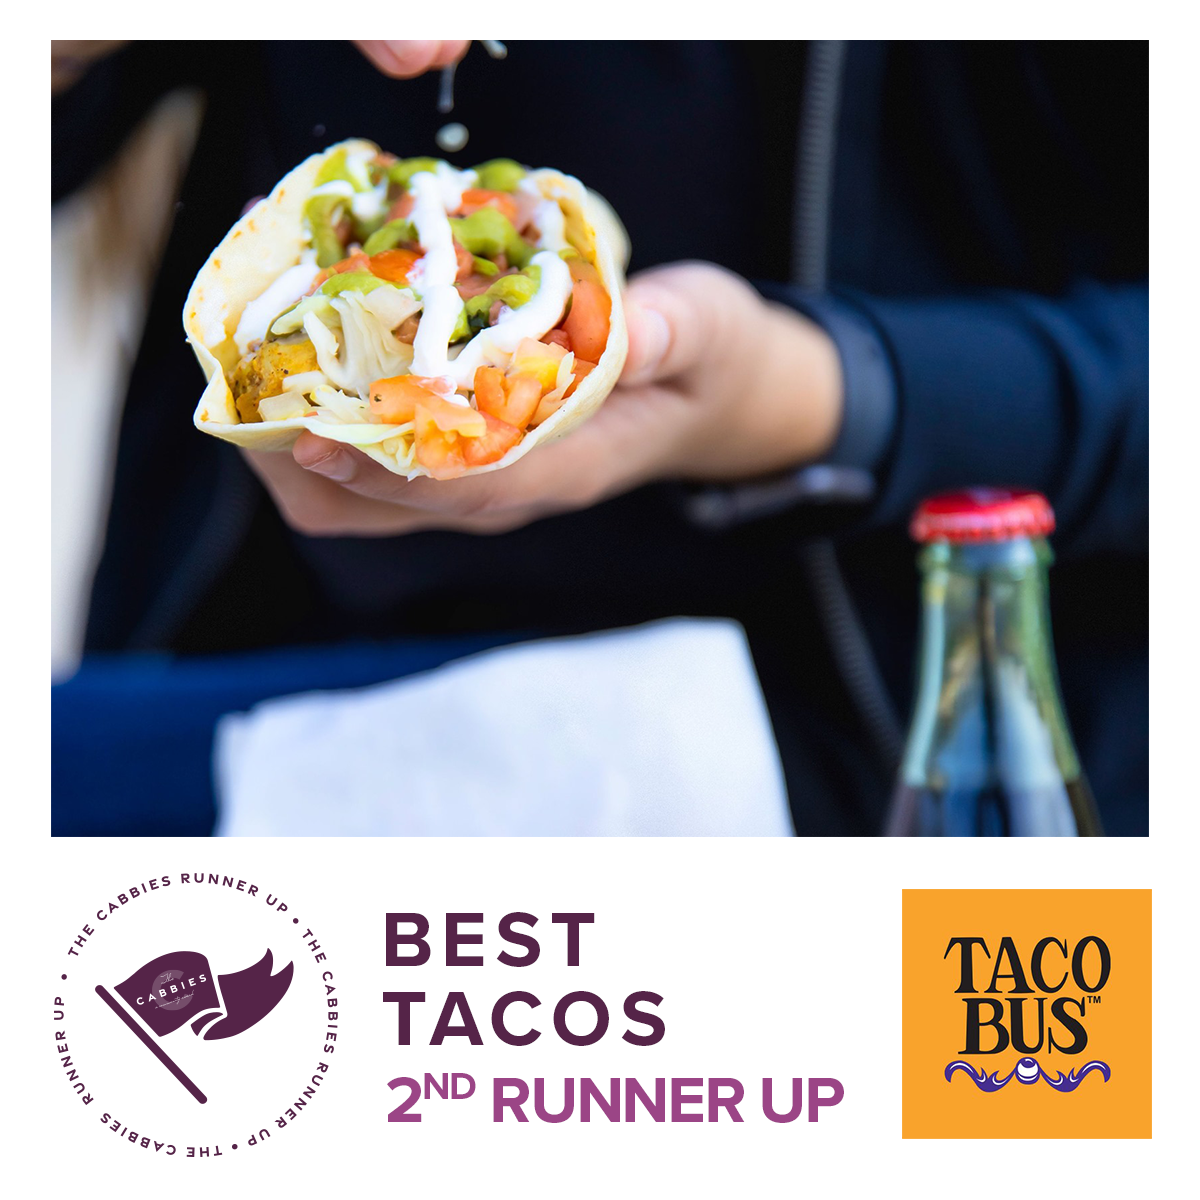 best tacos 2nd runner up - taco bus